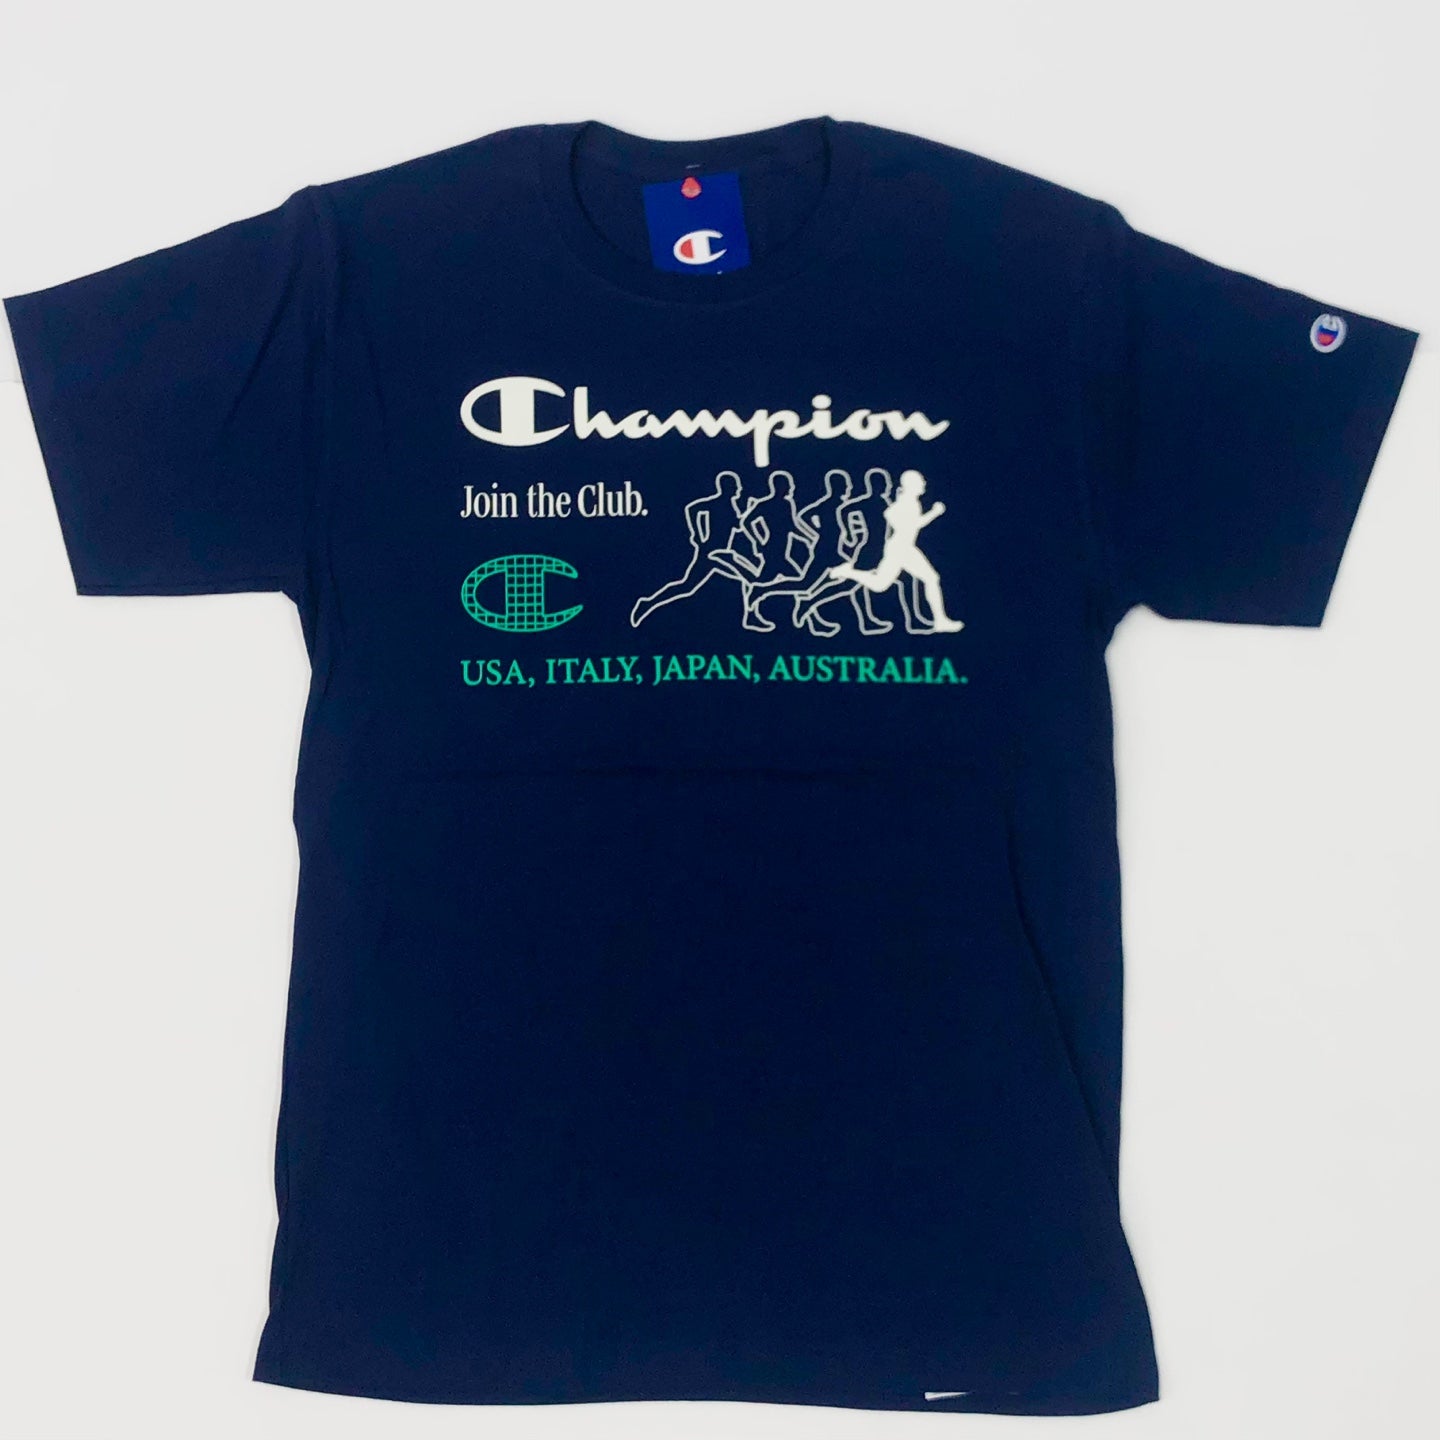 CHAMPION Join The Club Graphic T-Shirt